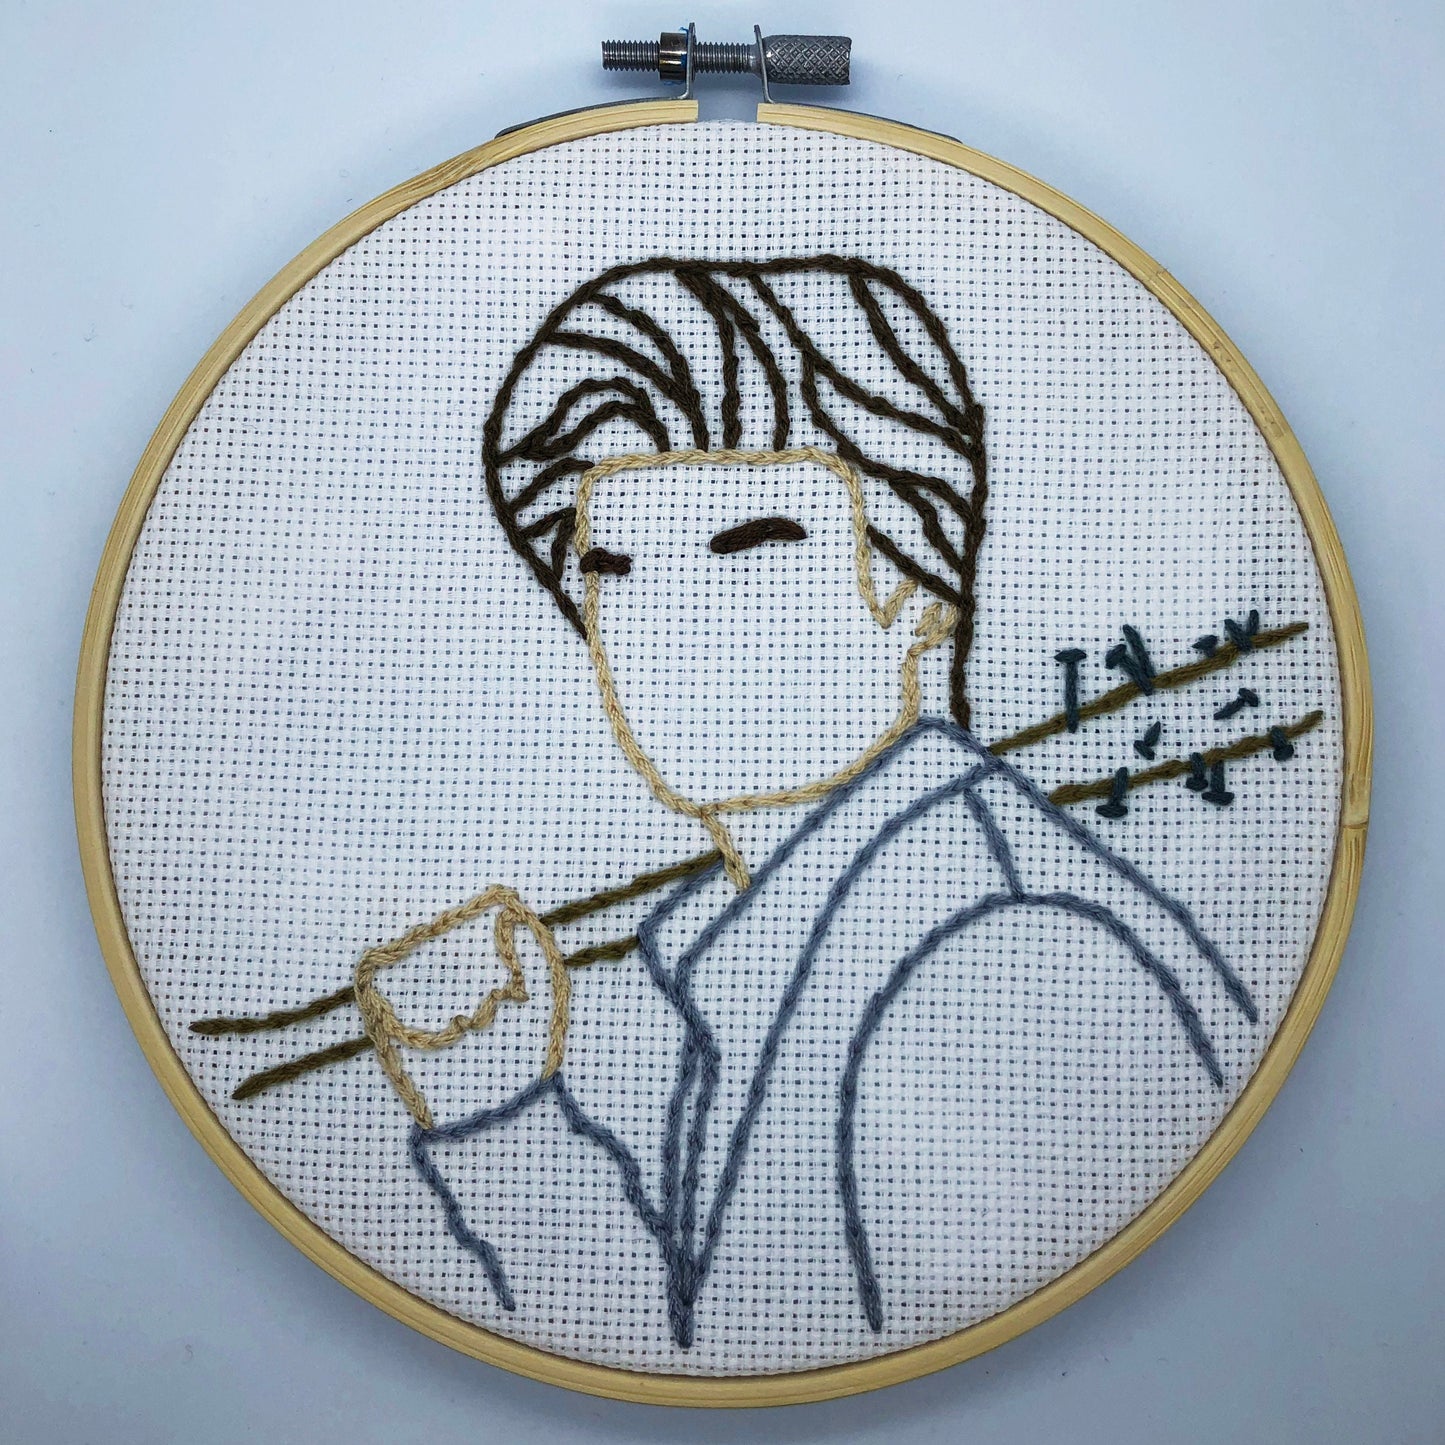 Stranger Things embroidery